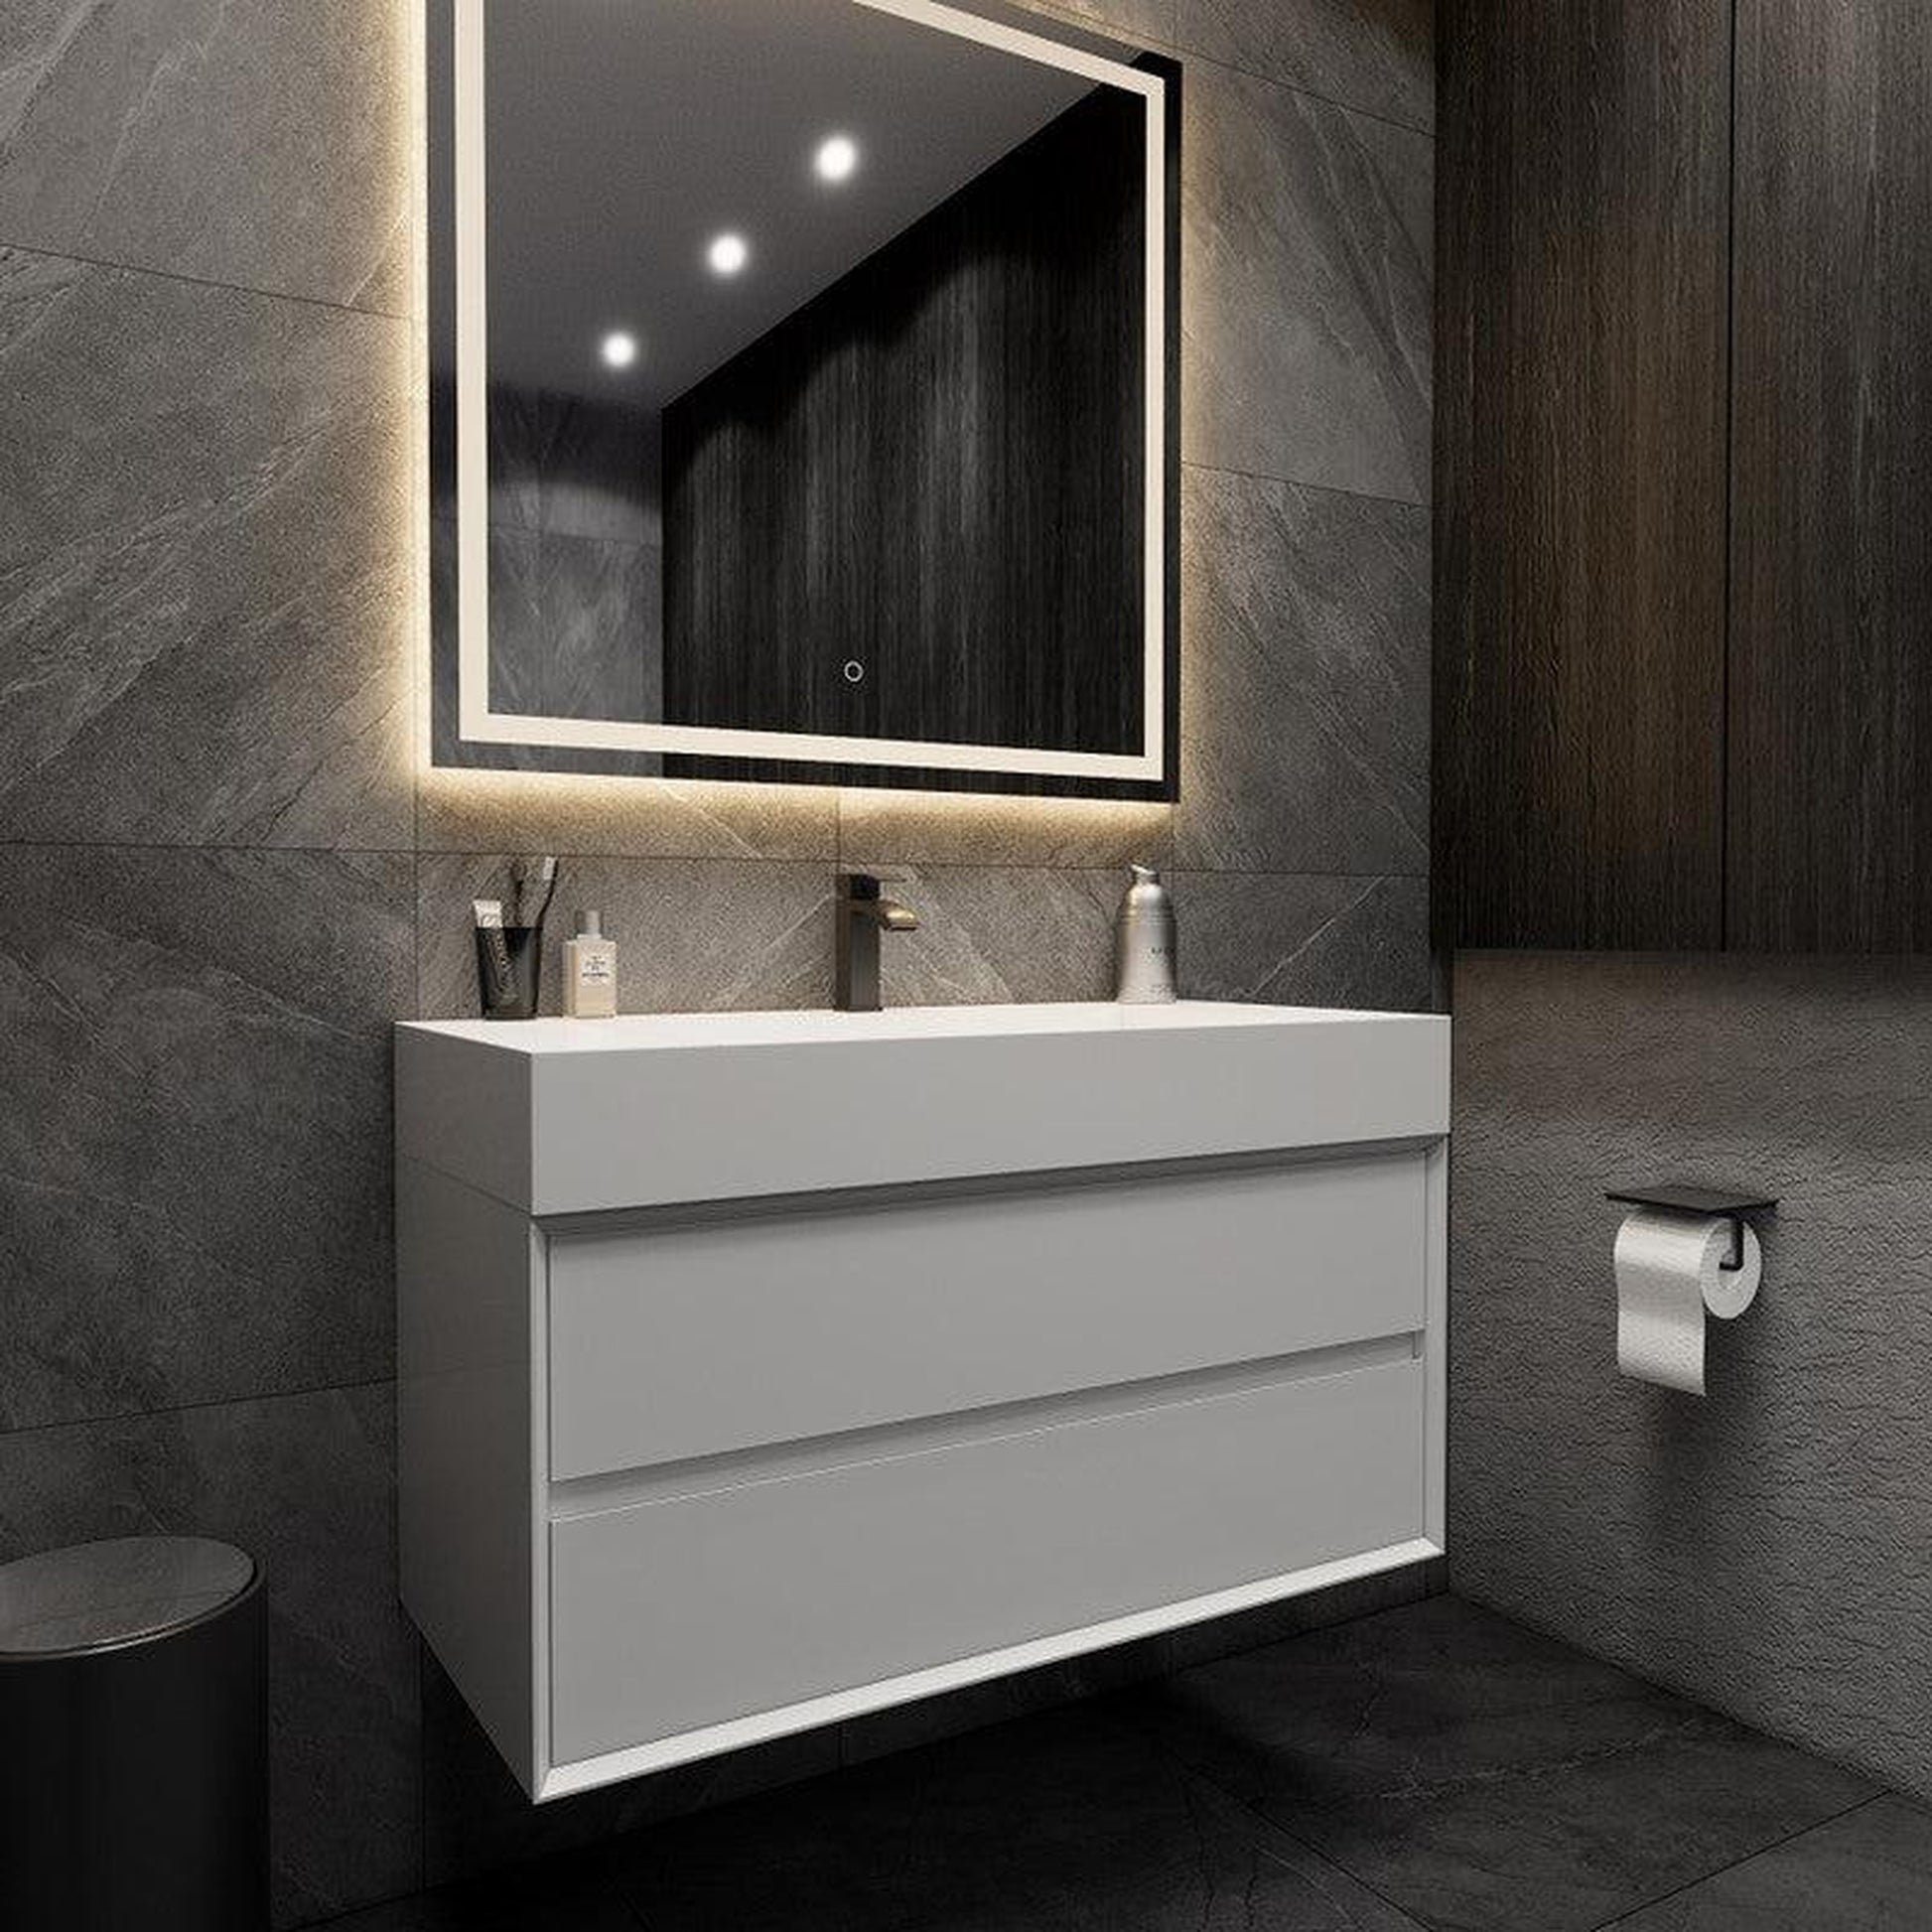 Moreno Bath MAX 42" Gloss White Wall-Mounted Vanity With Single Reinforced White Acrylic Sink